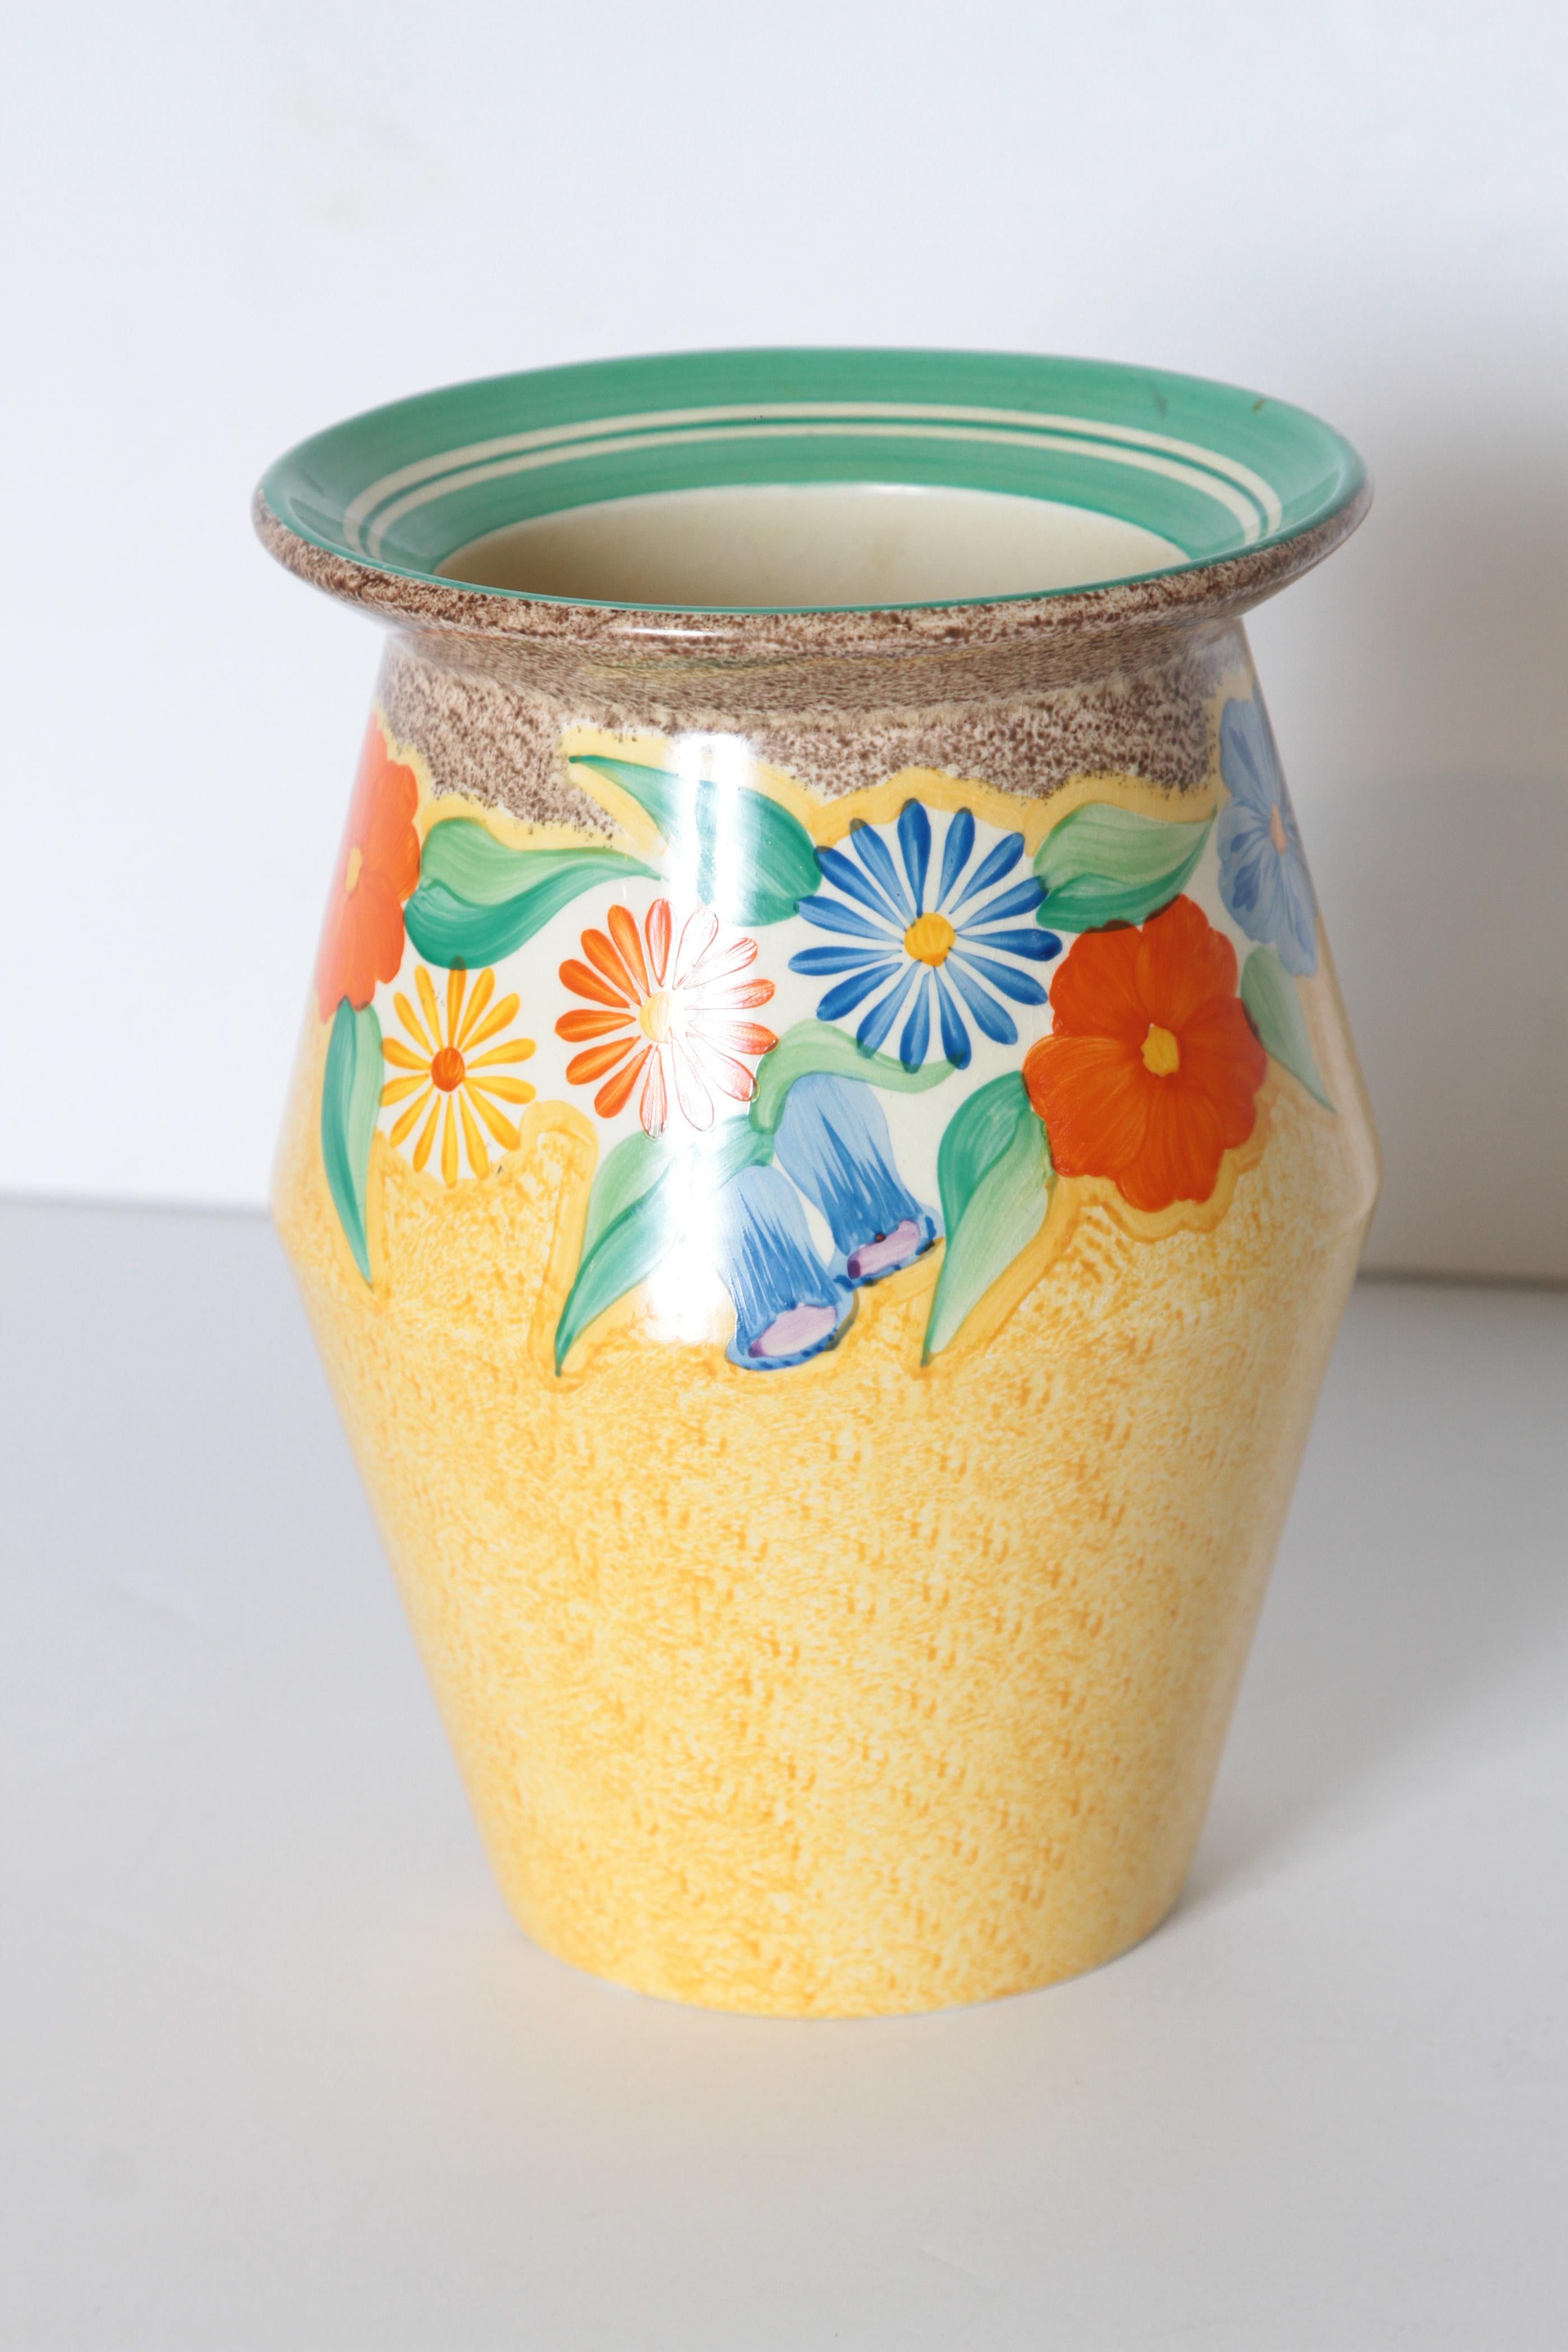 Art Deco Clarice Cliff bizarre vase, hand painted, Newport Pottery, England

Uncommon flared form and pattern. Almost a sponge - ware look to the yellow.
Top-banded multi-floral pattern with striped flared rim.
Good vivid colors; relatively